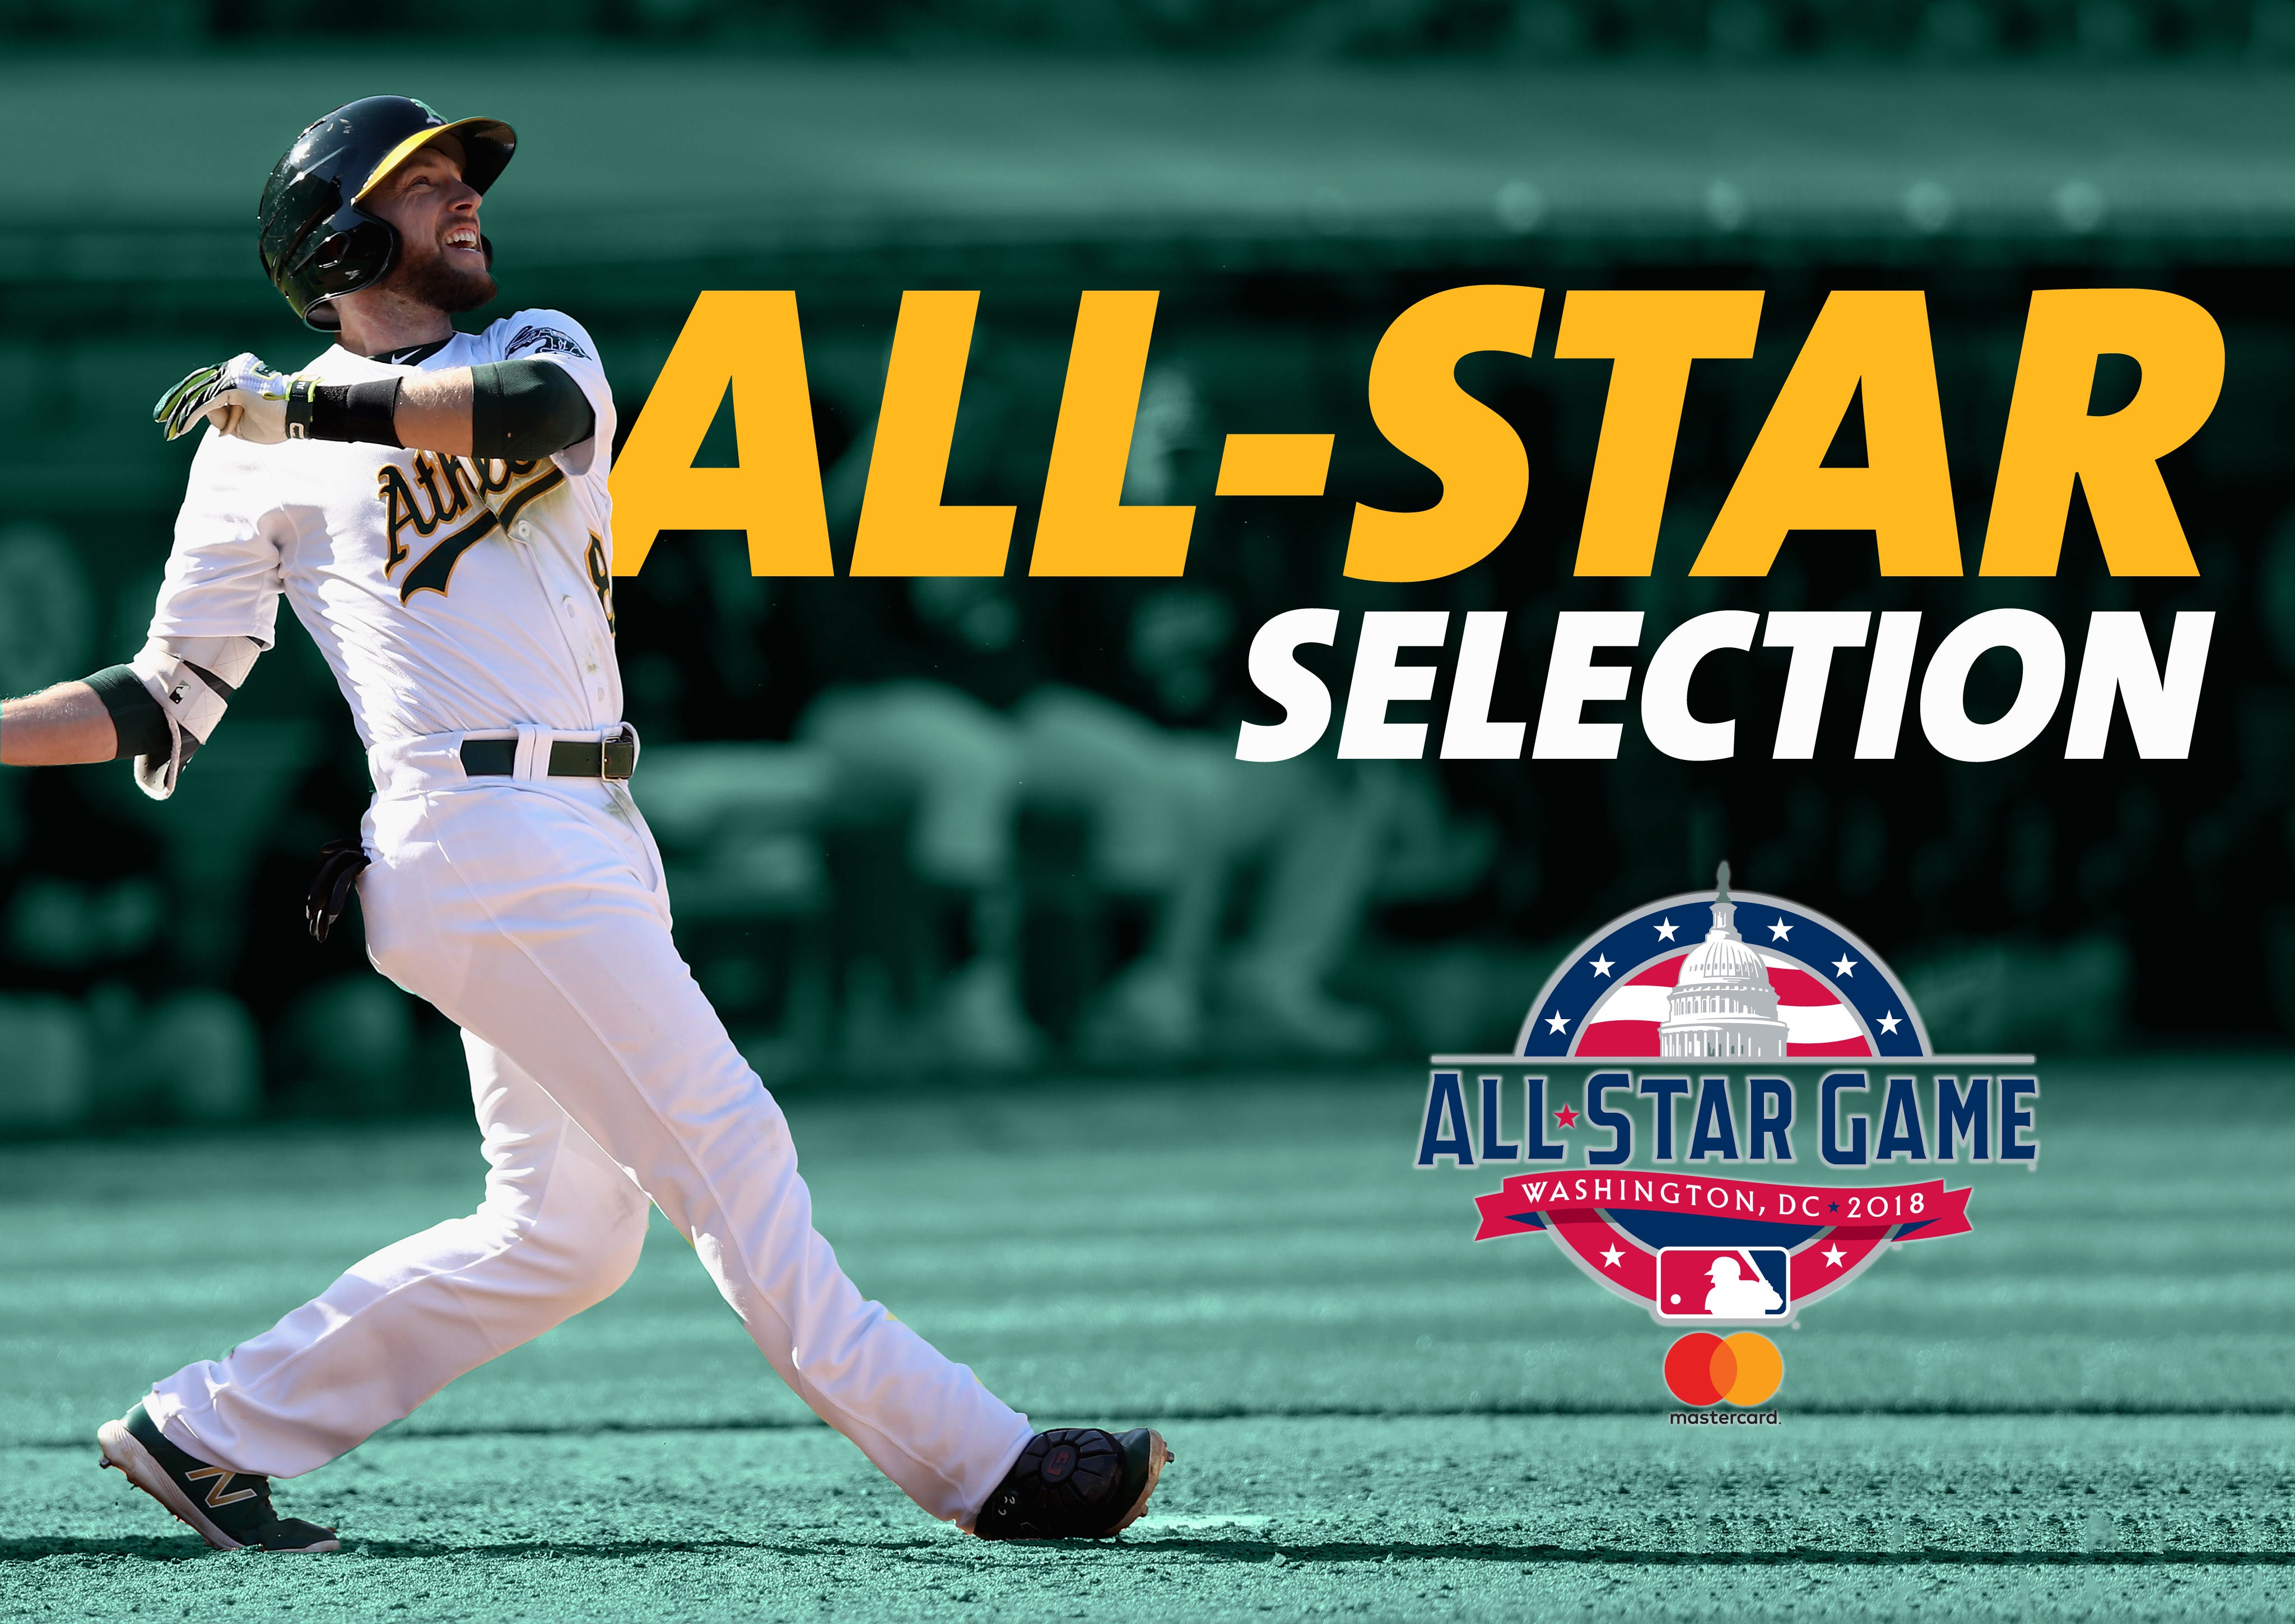 Jed Lowrie: American League All Star 